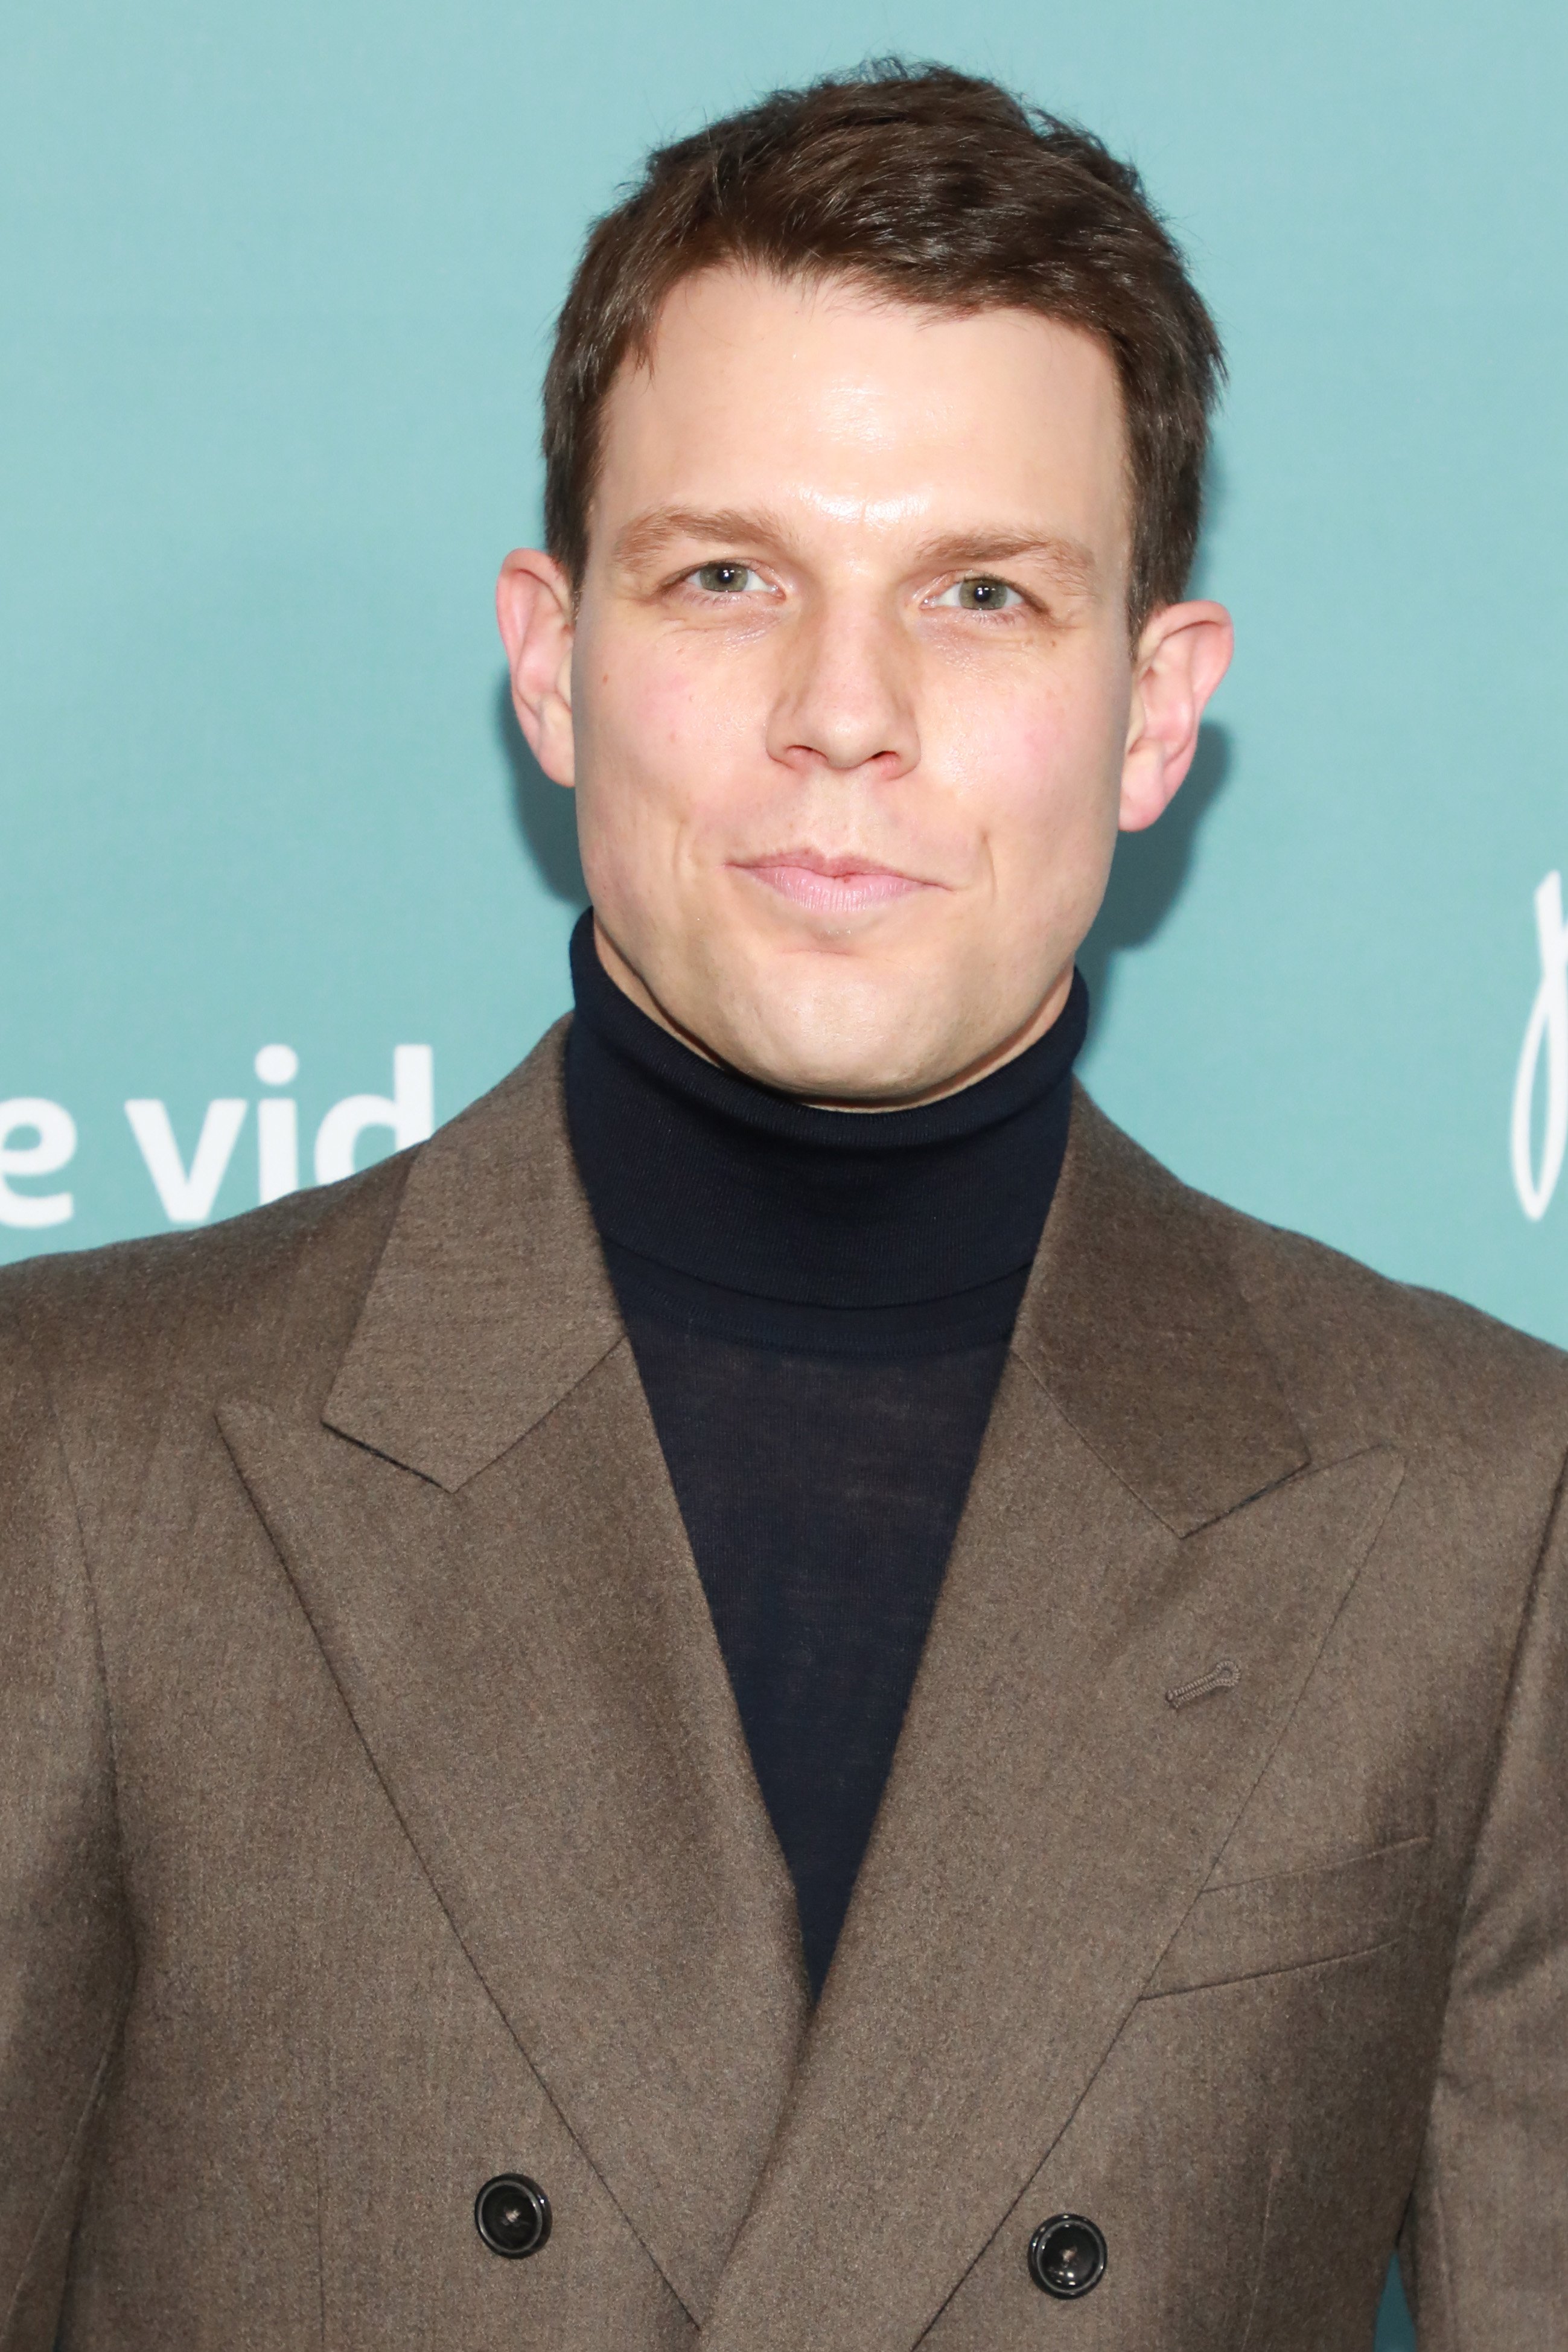 Jake Lacy photographed at the "Being The Ricardos"  premiere In New York | Source: Getty Images